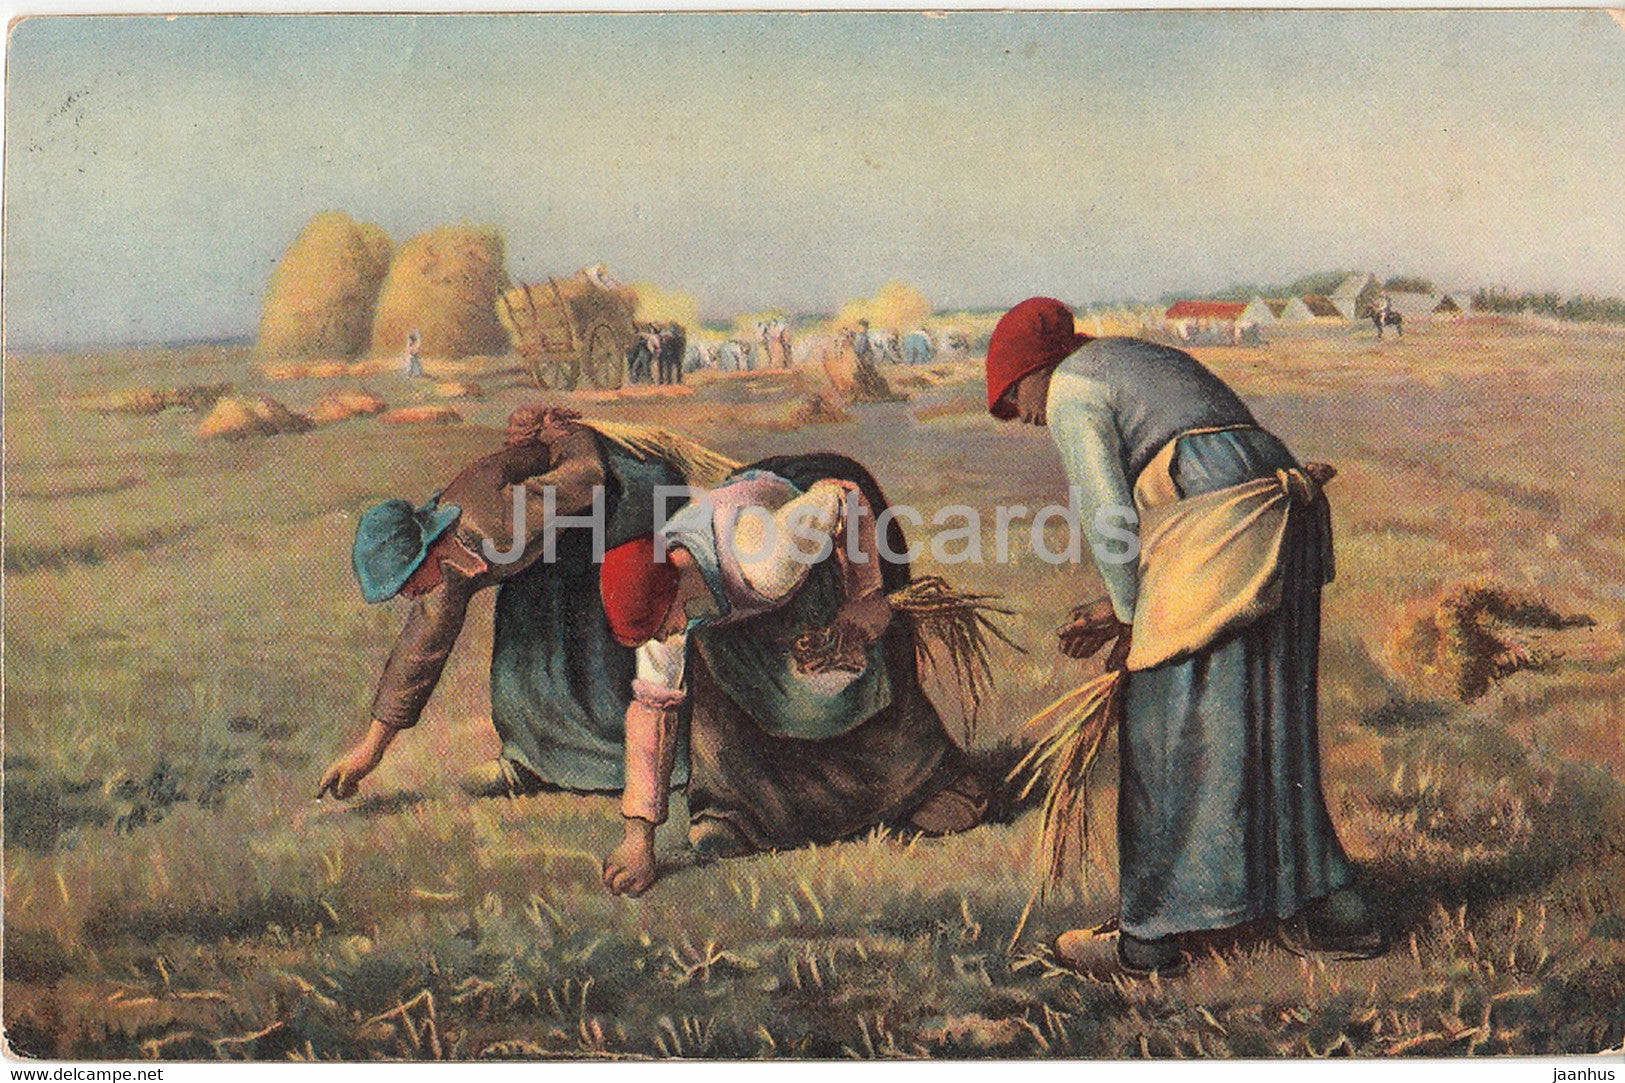 painting by Jean Francois Millet - Die Ahrenleserinnen - Stengel - 54 - French art - old postcard - 1925 Germany - used - JH Postcards